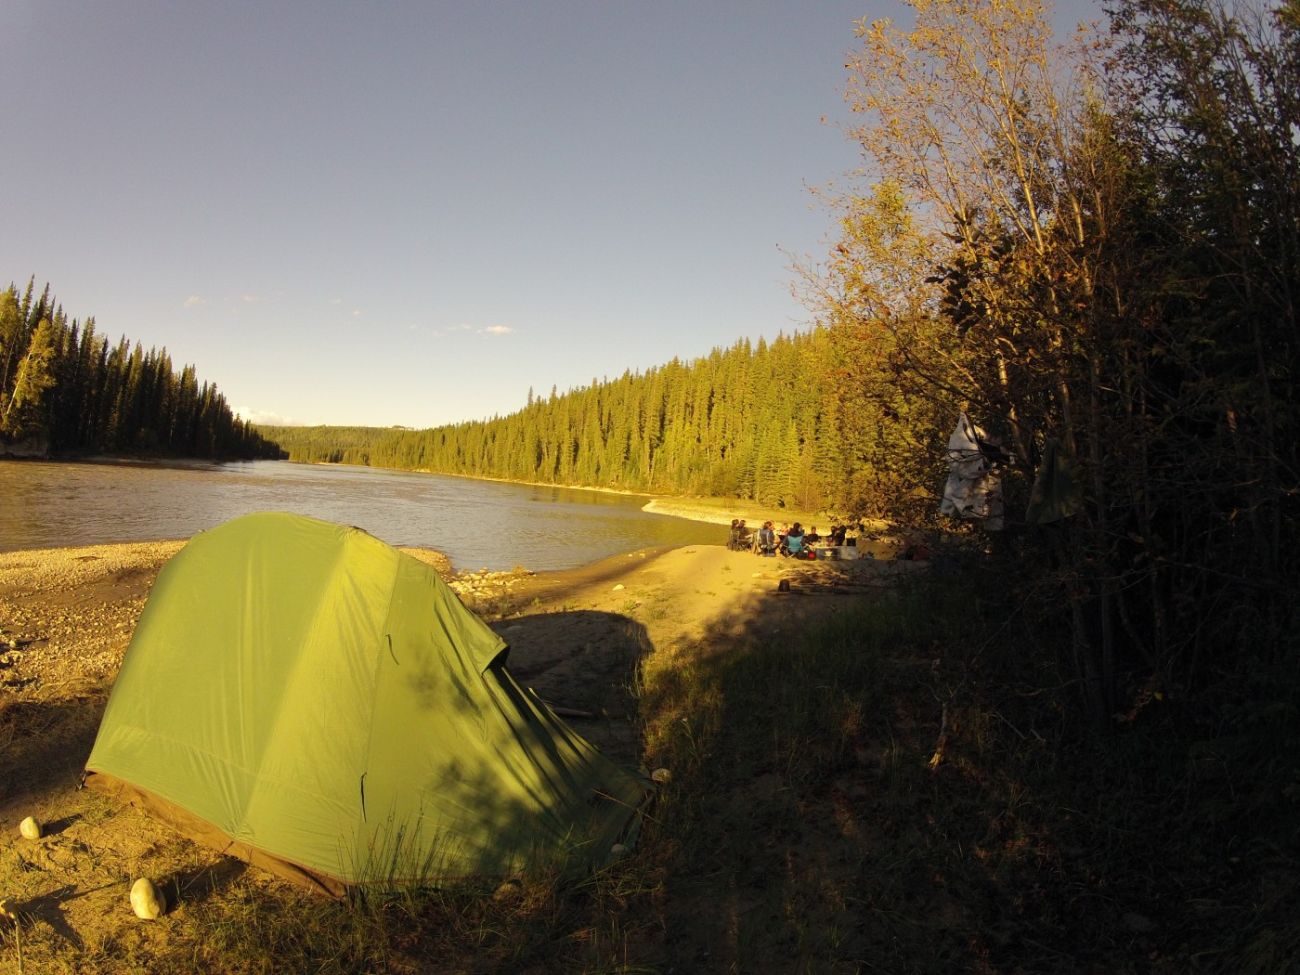 camp at athabasca river during canoe trip in canada, alberta | wild zelten am athabsca bei der kanutour in kanada